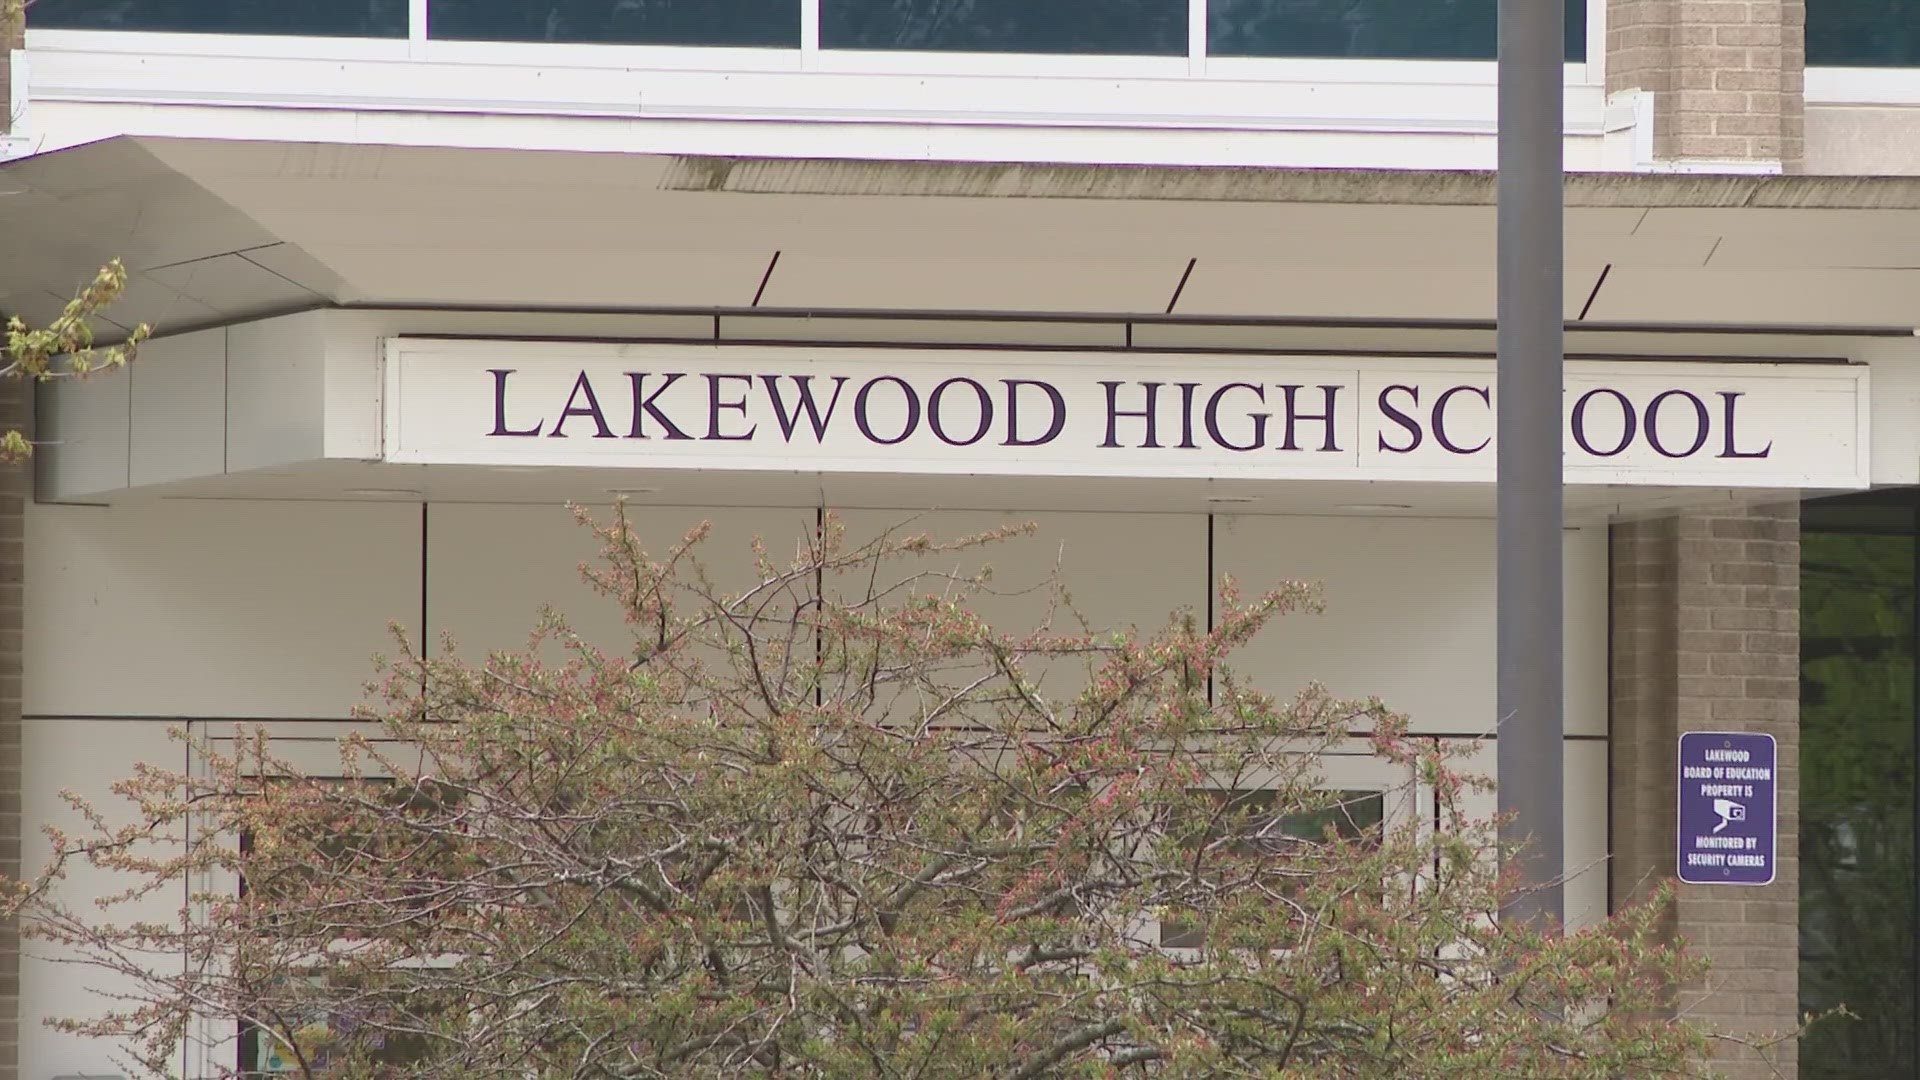 Lakewood High School officials say the former student was charged with possession of a deadly weapon (knife) on school property.